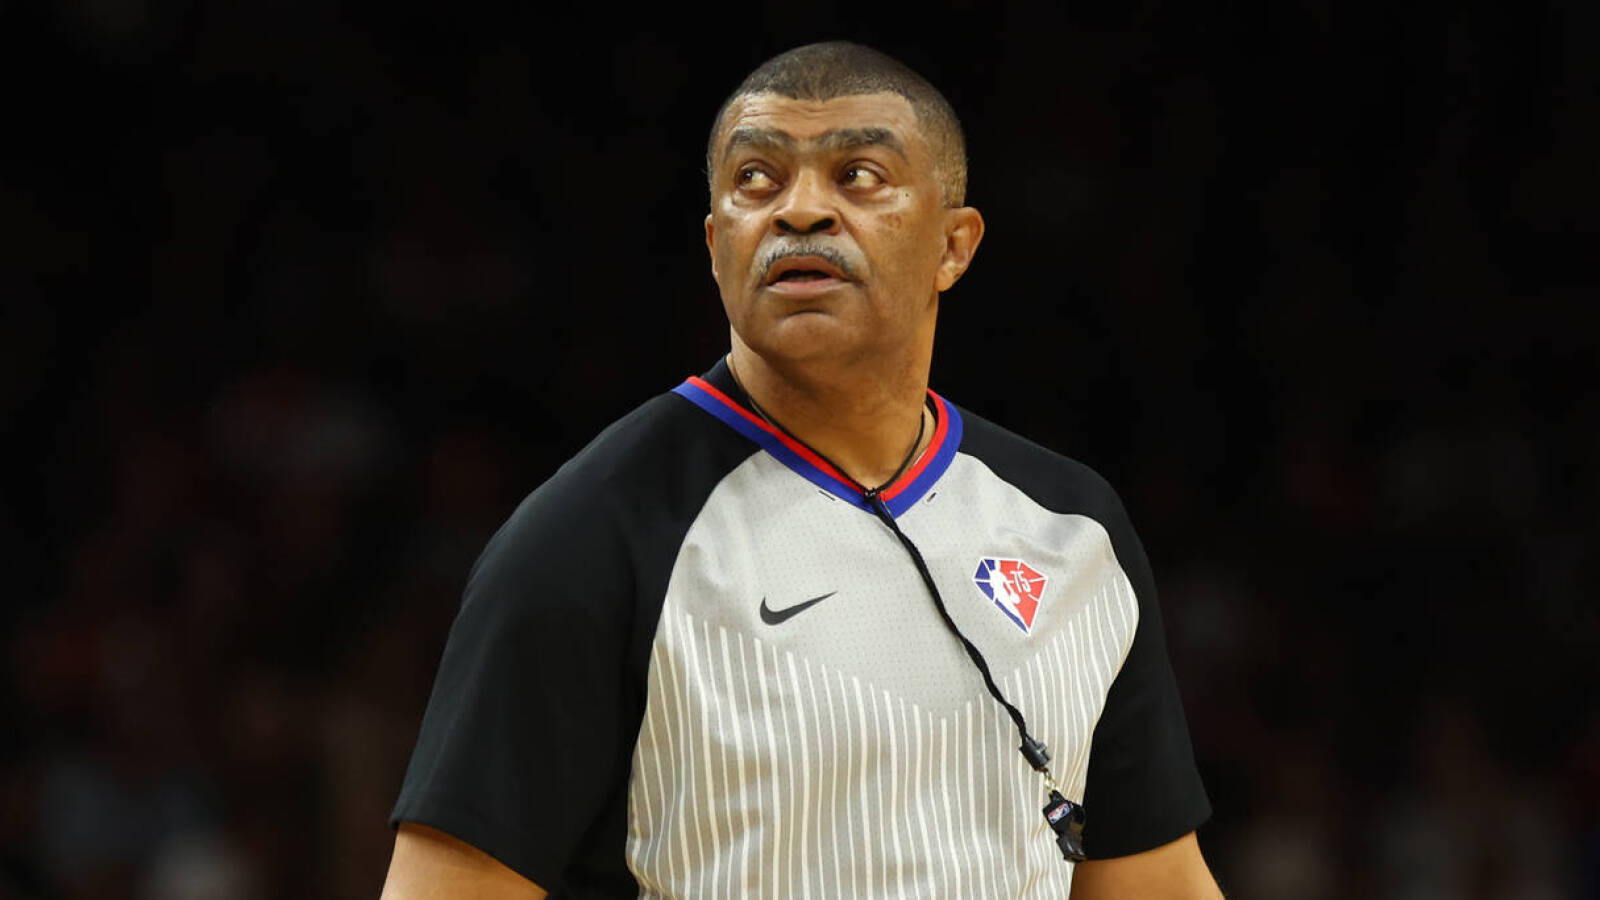 Report: NBA Ref Tony Brothers Was Forced to Miss 1 Game for